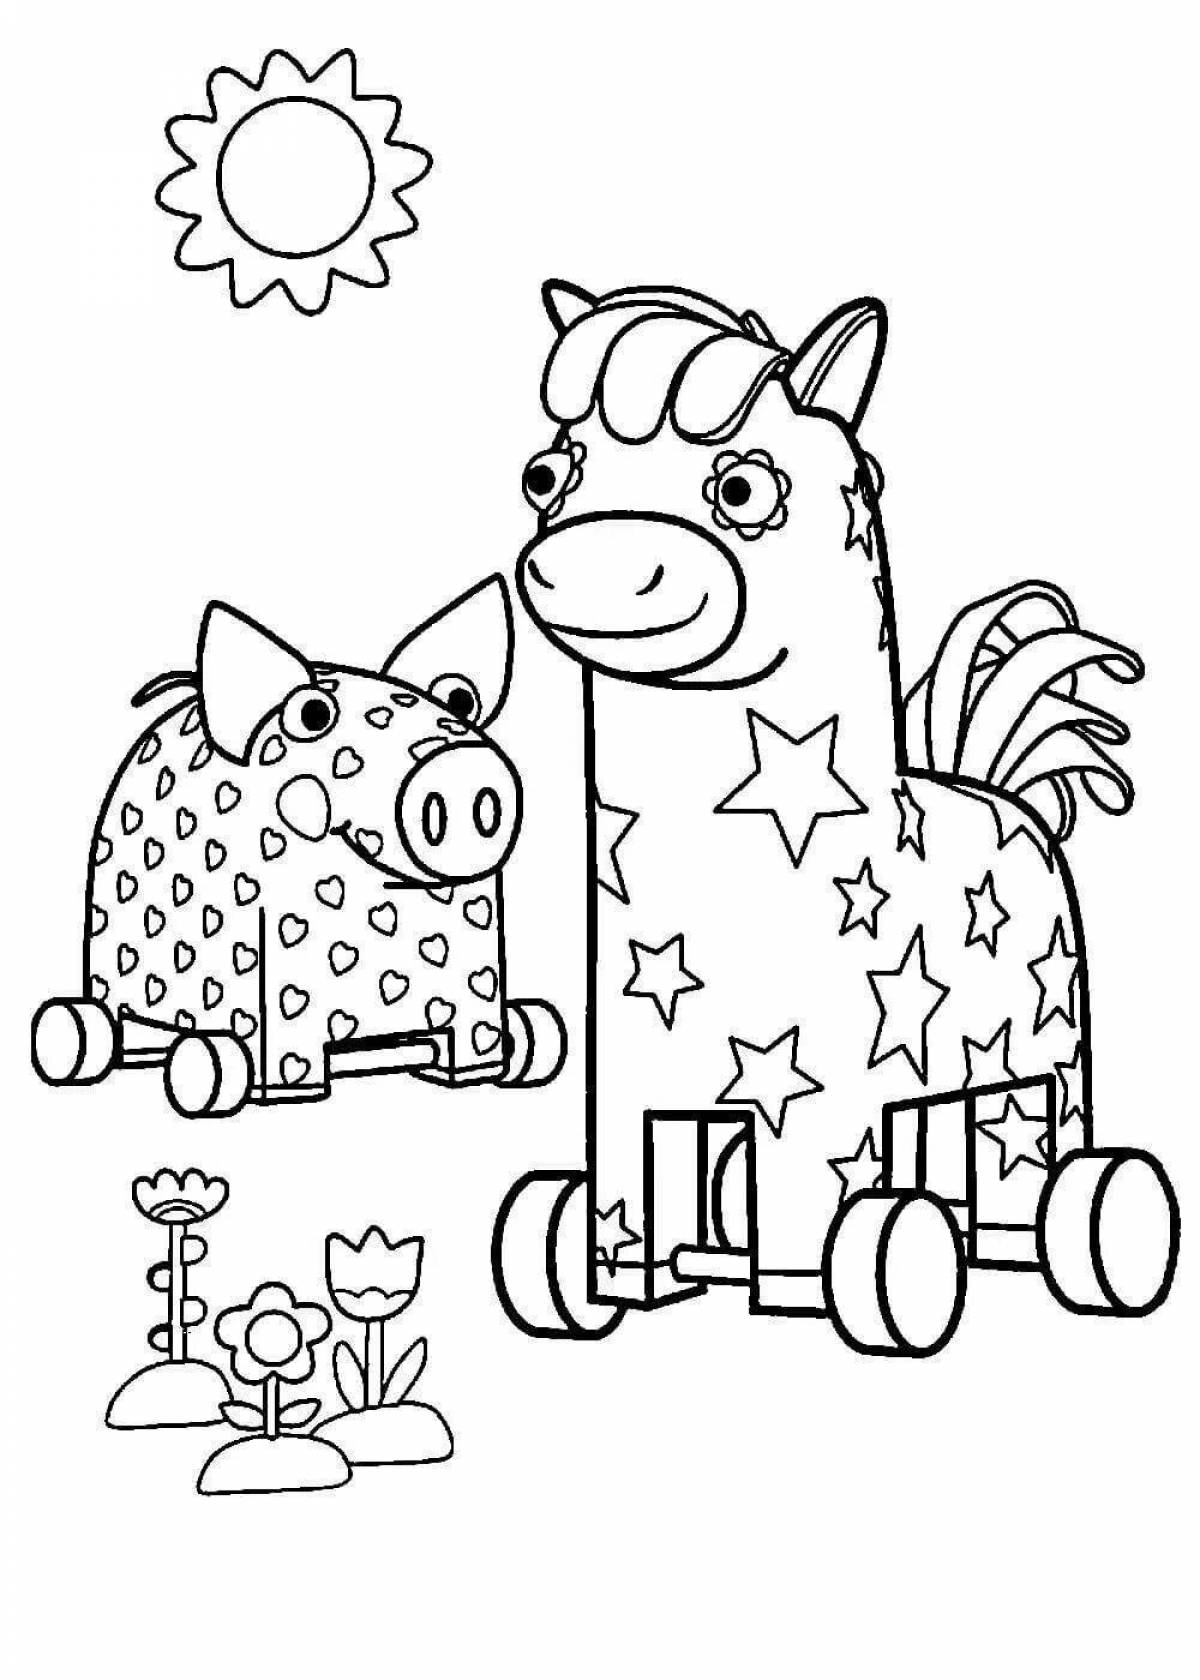 Coloring book bright wooden dog